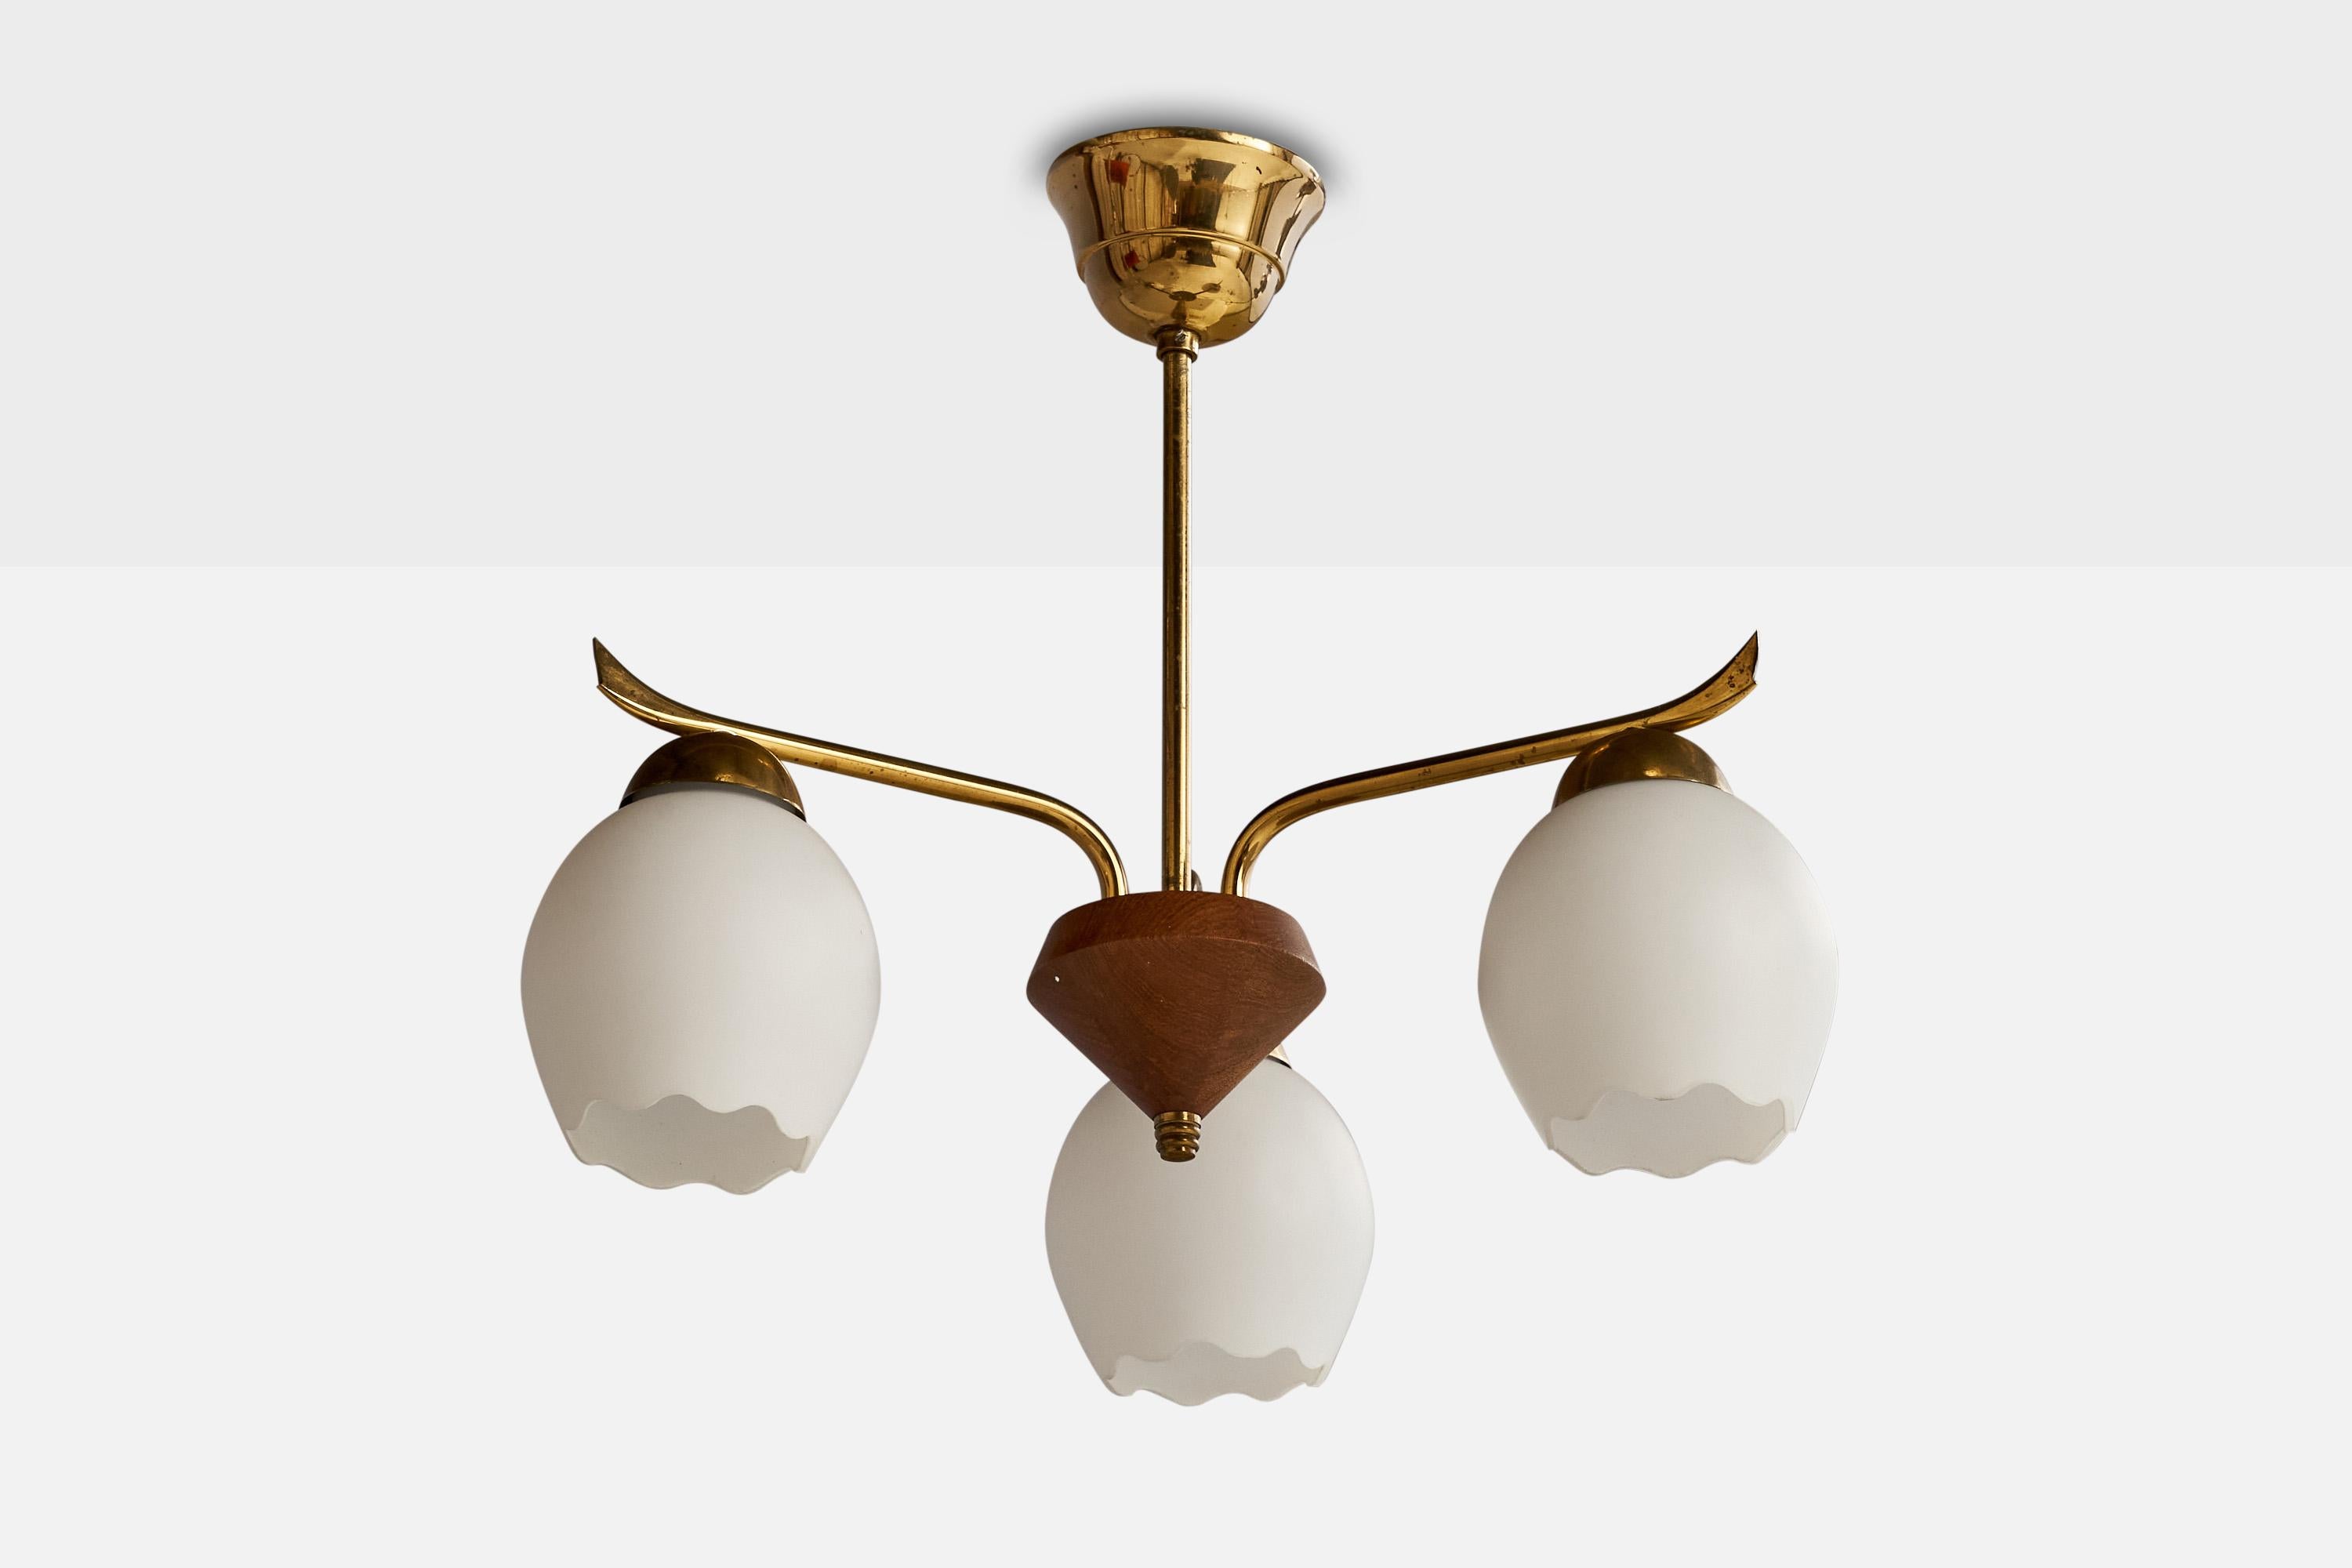 A brass teak and glass chandelier light designed and produced in Sweden, 1950s.

Dimensions of canopy (inches): 2.5” H x 3.75”  Diameter
Socket takes standard E-26 bulbs. 3 sockets.There is no maximum wattage stated on the fixture. All lighting will